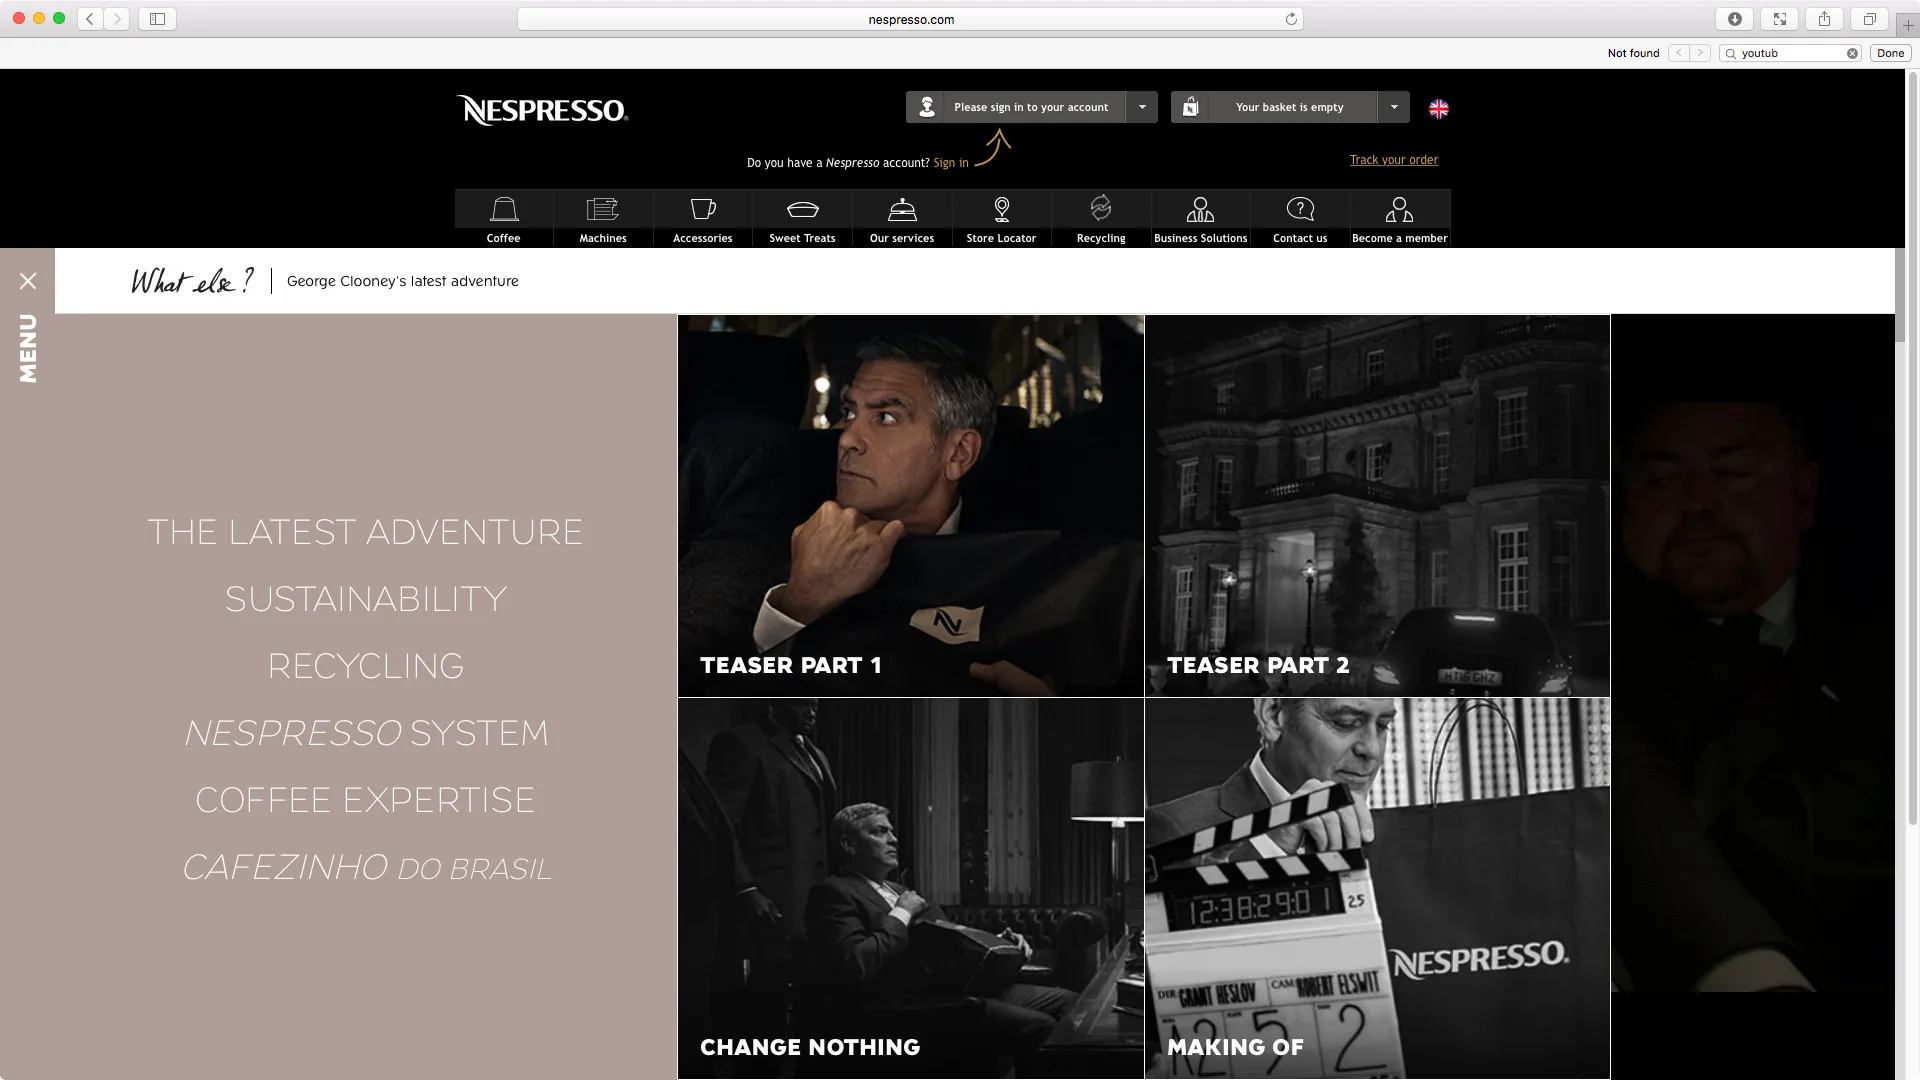 Designs for a Nespresso website featuring George Clooney